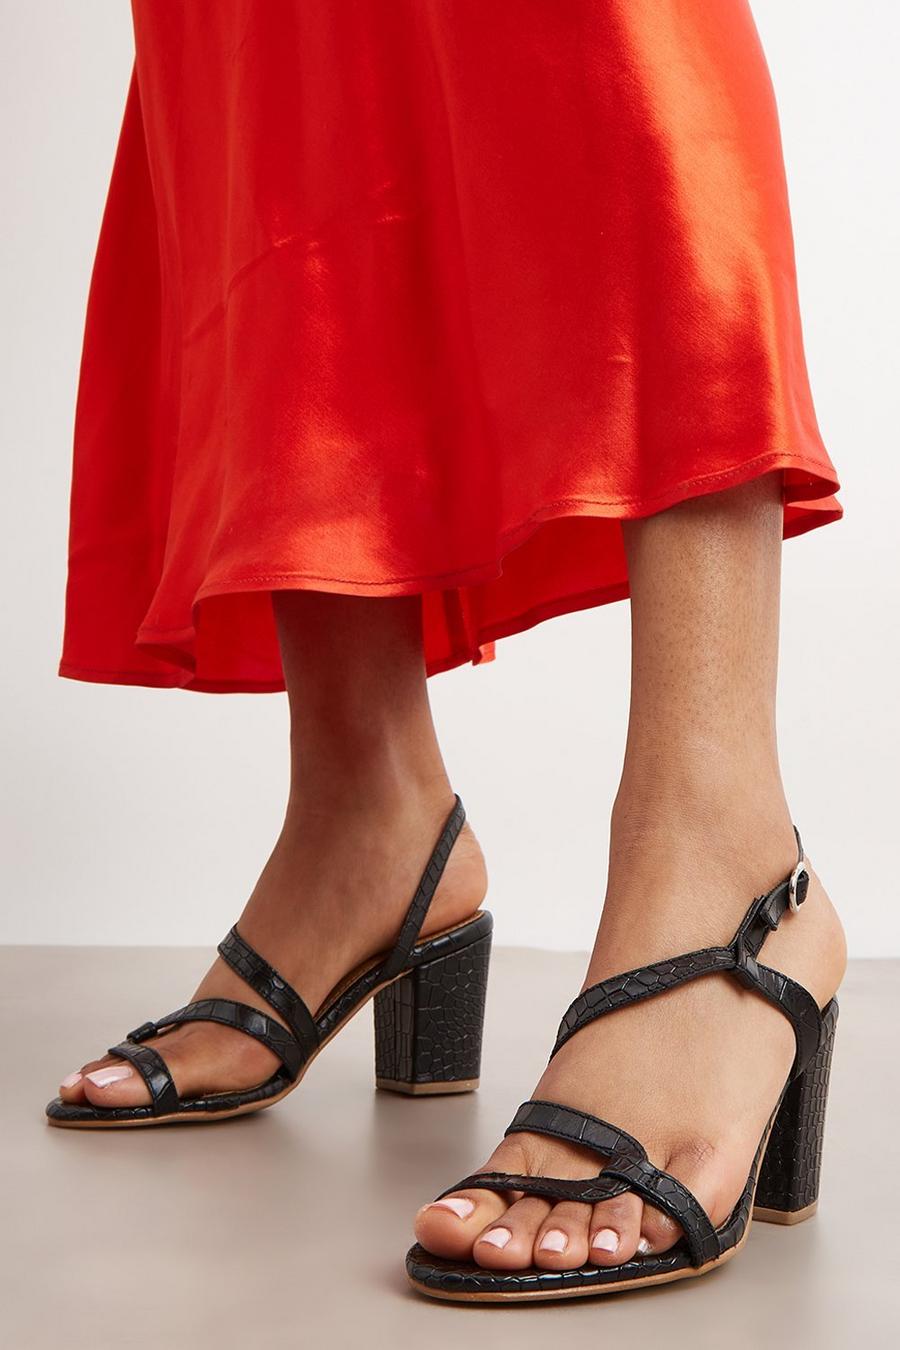 Principles: Diana Leather Strappy Heeled Sandal